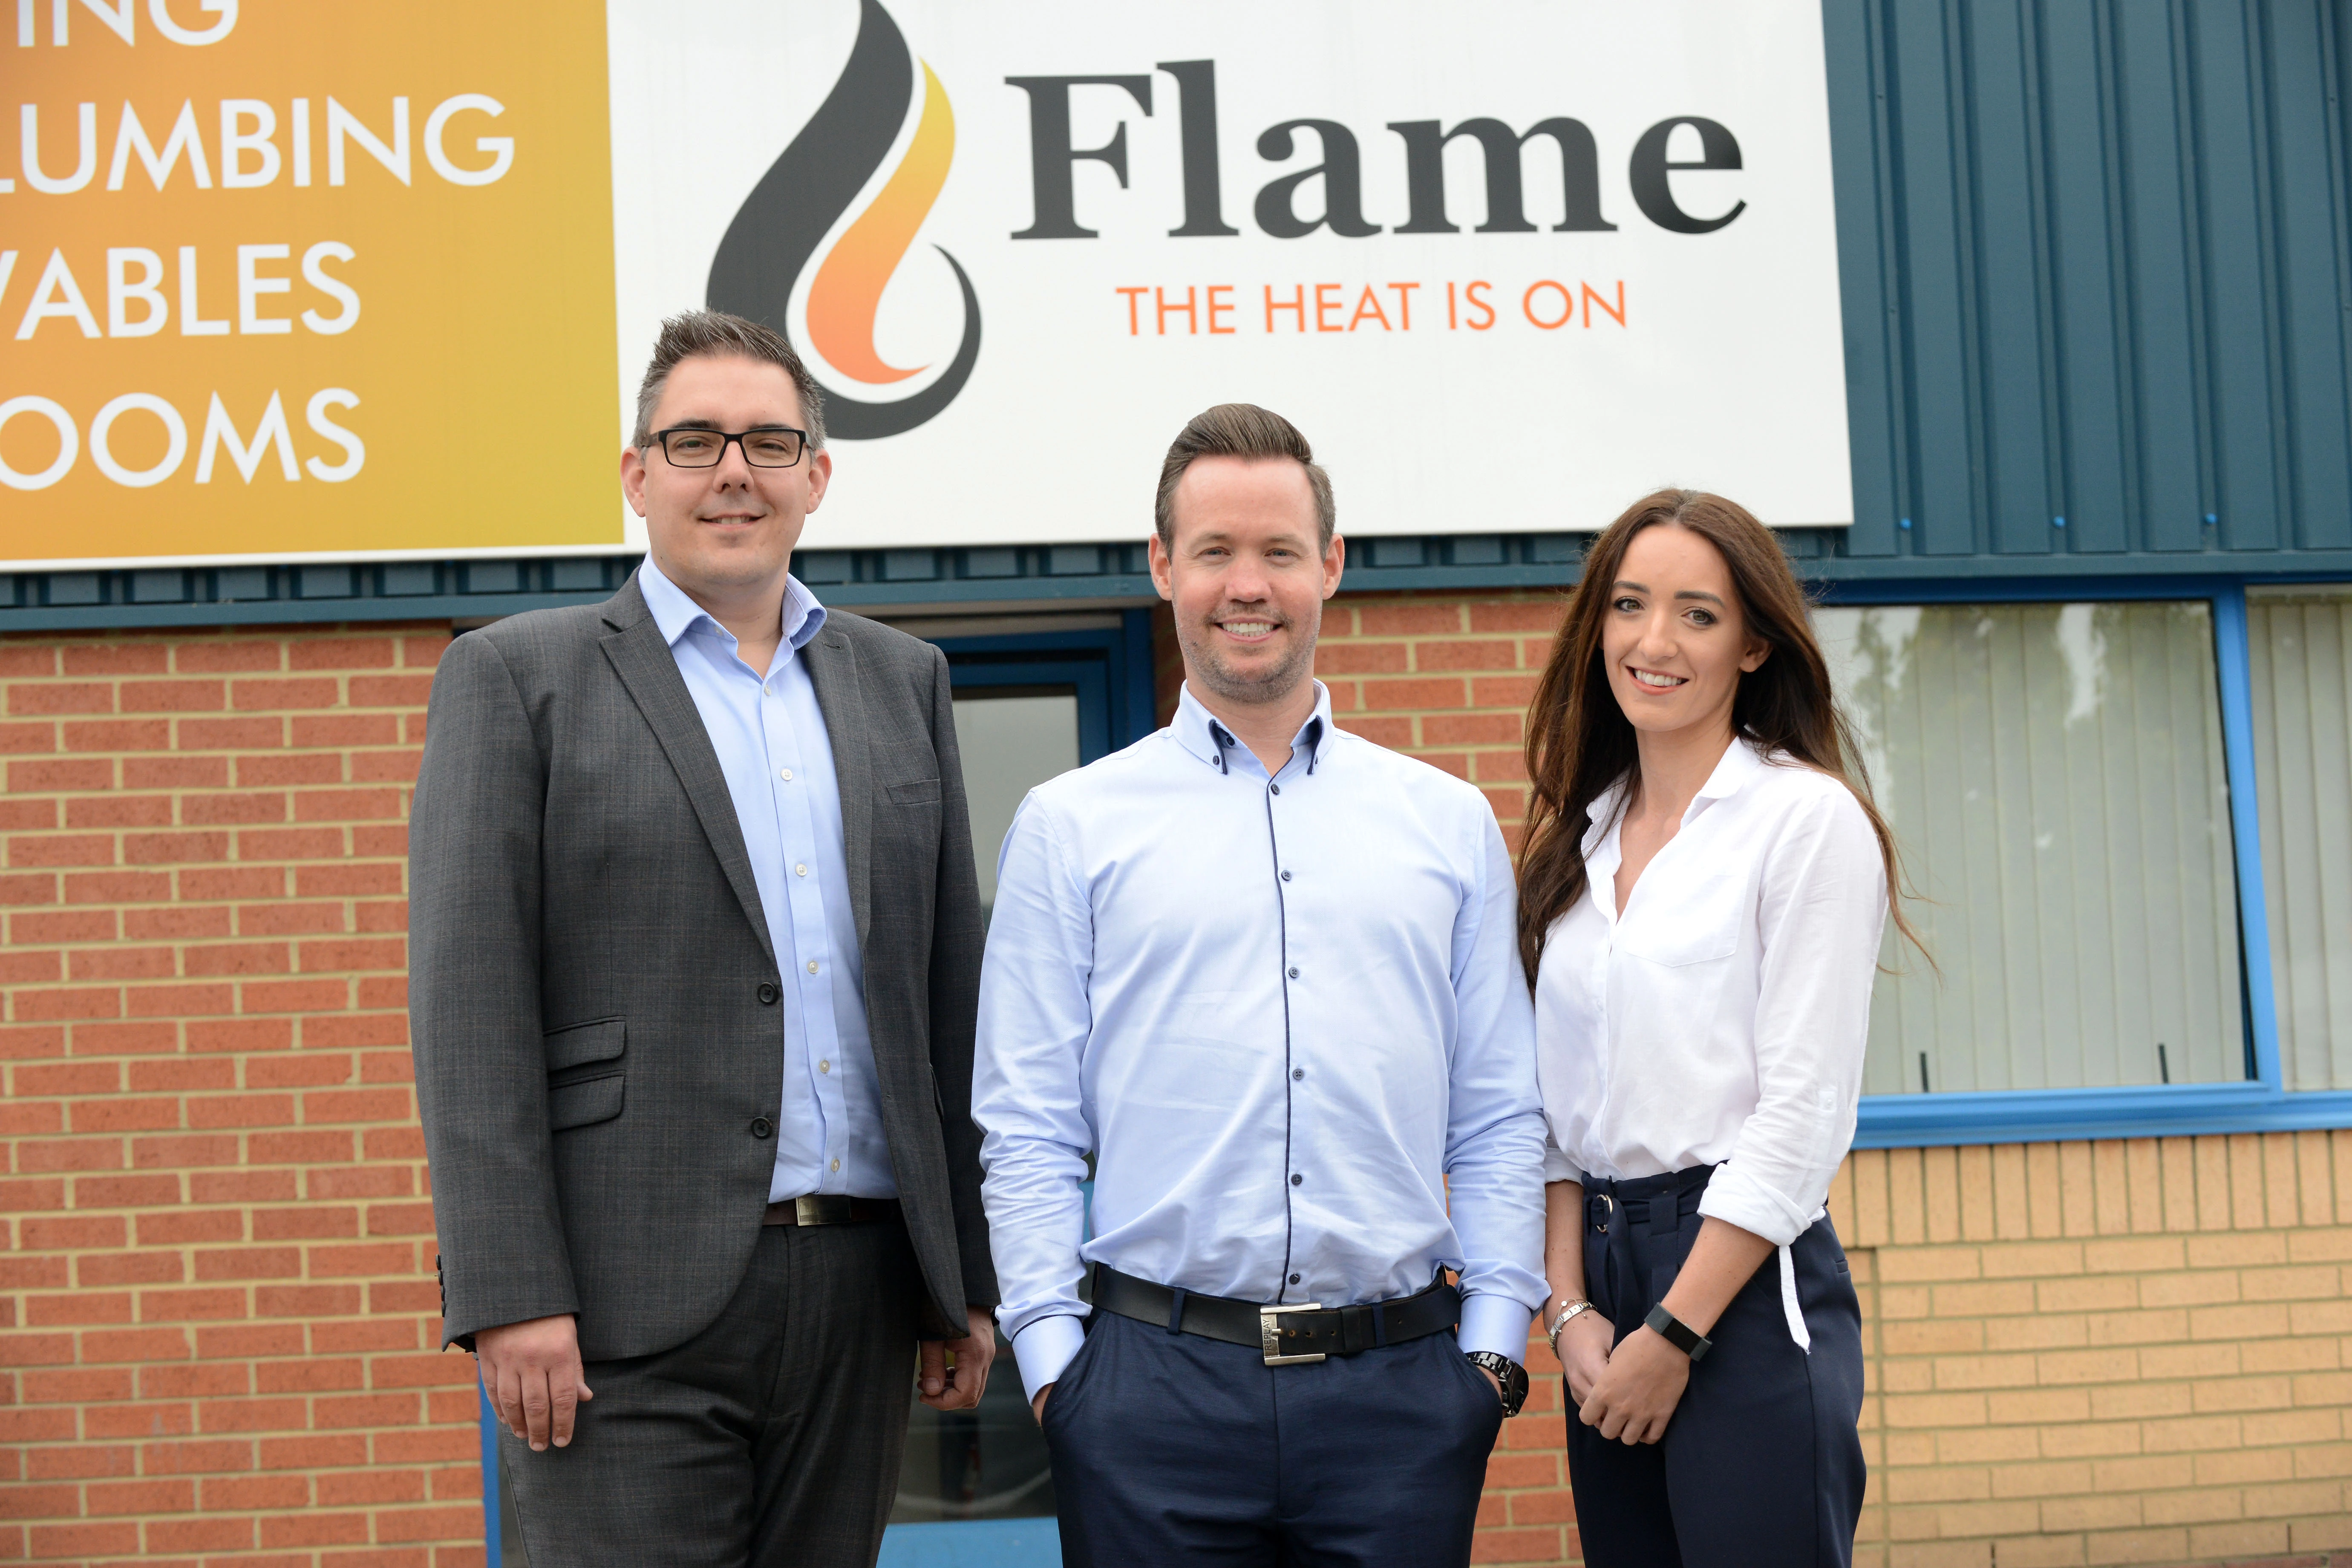 Flame Heating Group